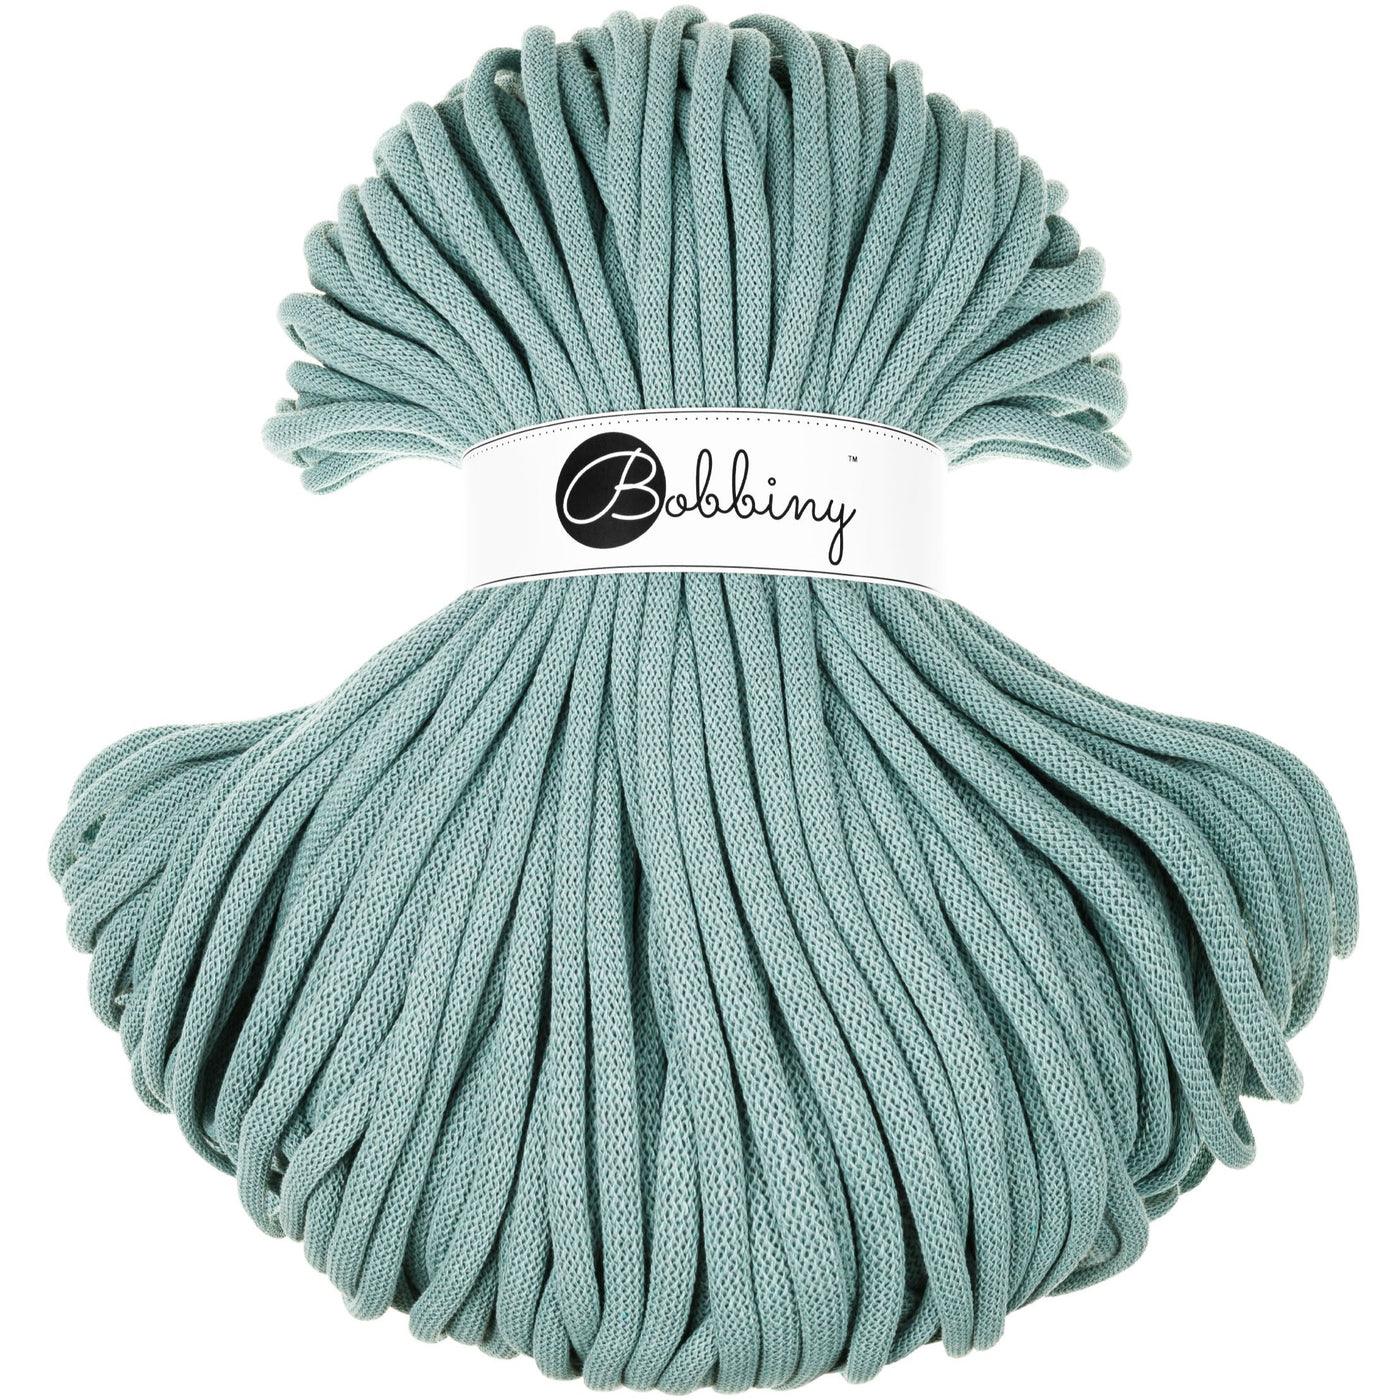 Bobbiny braided cord 9mm in duck egg blue shade 